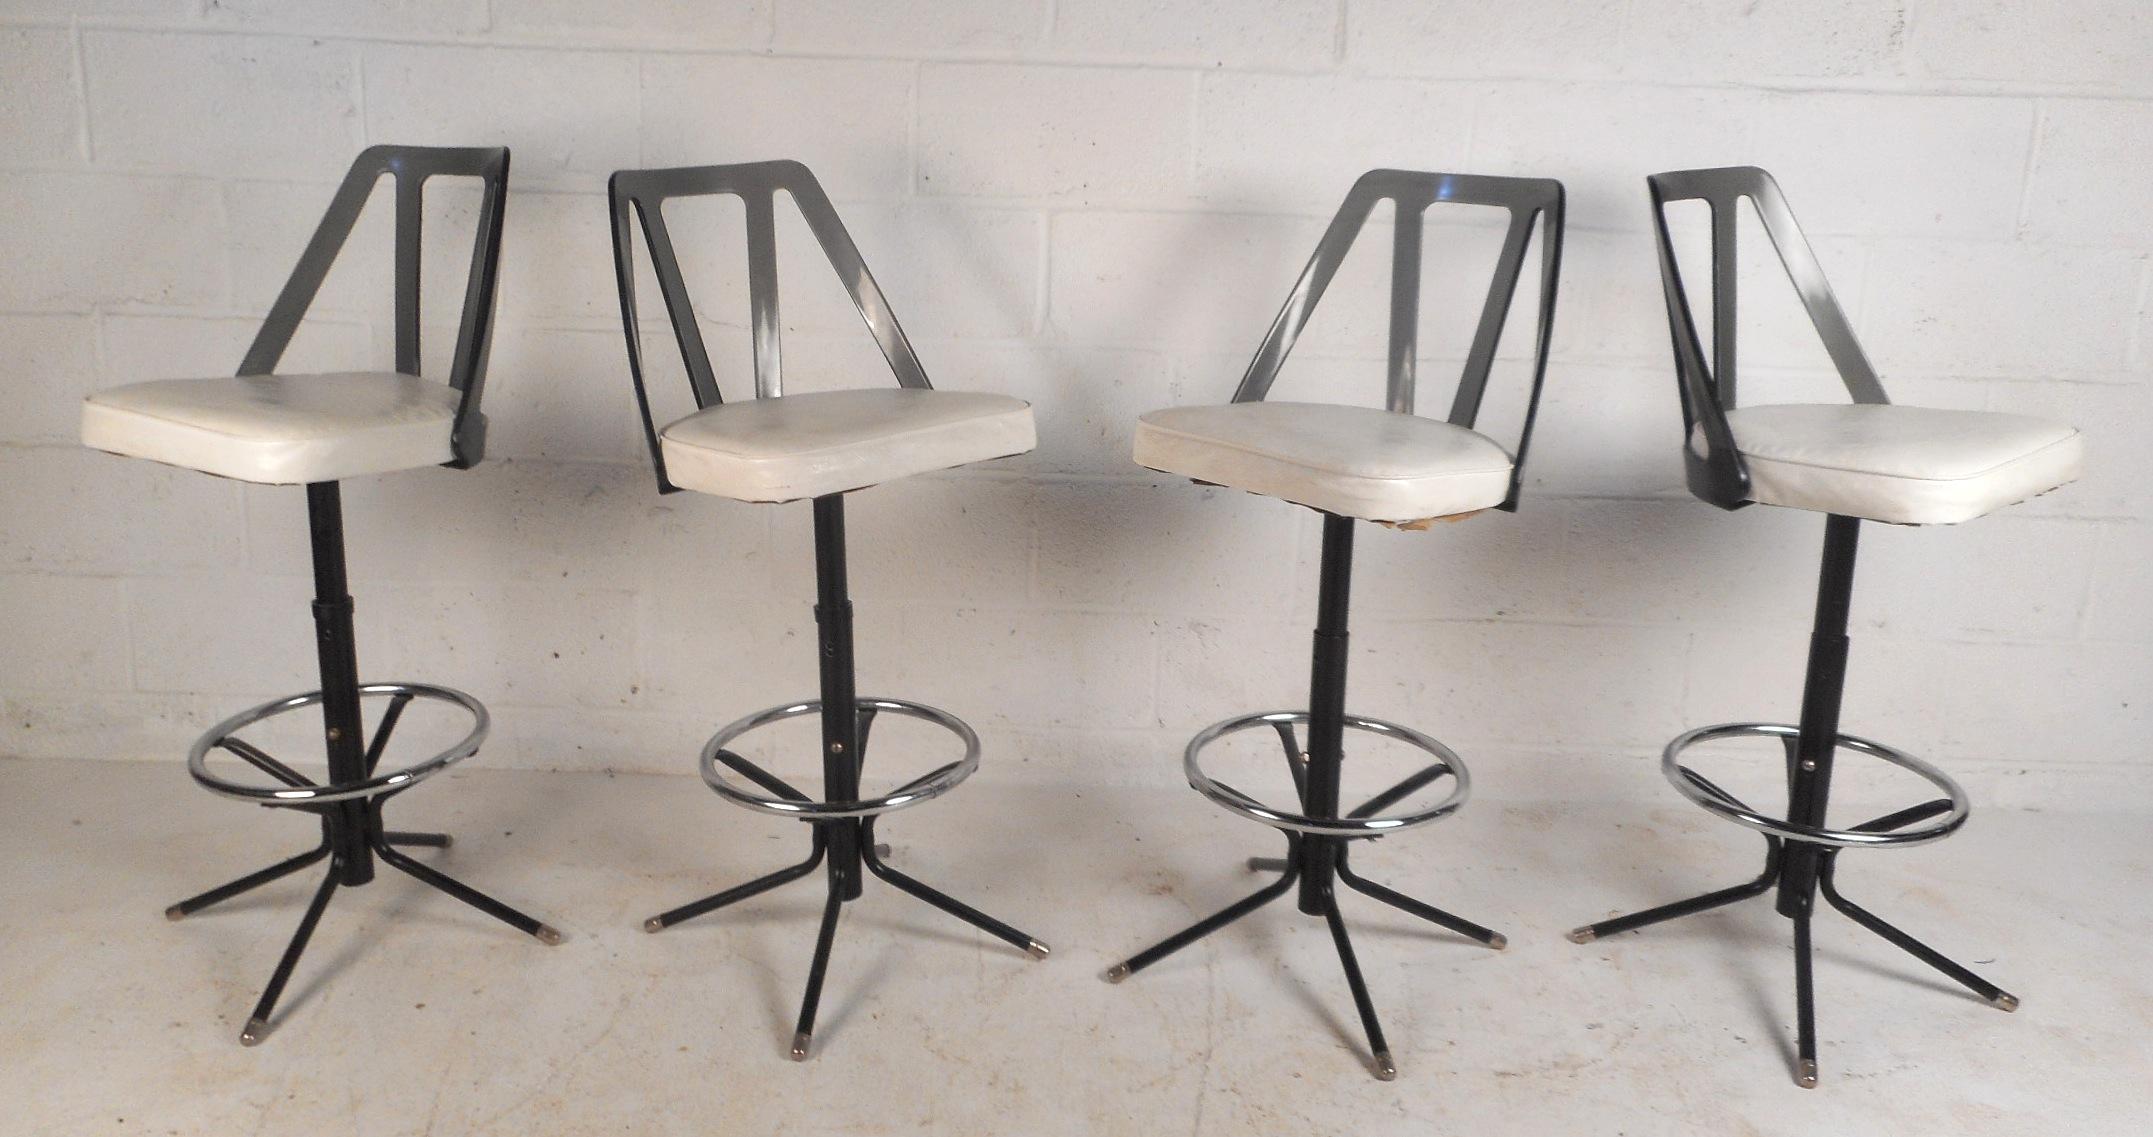 This beautiful set of four vintage modern bar stools feature unique tinted Lucite back rests and white vinyl upholstery. A comfortable design with the ability to swivel and a conveniently placed circular kick rest. A sleek design with a sturdy metal